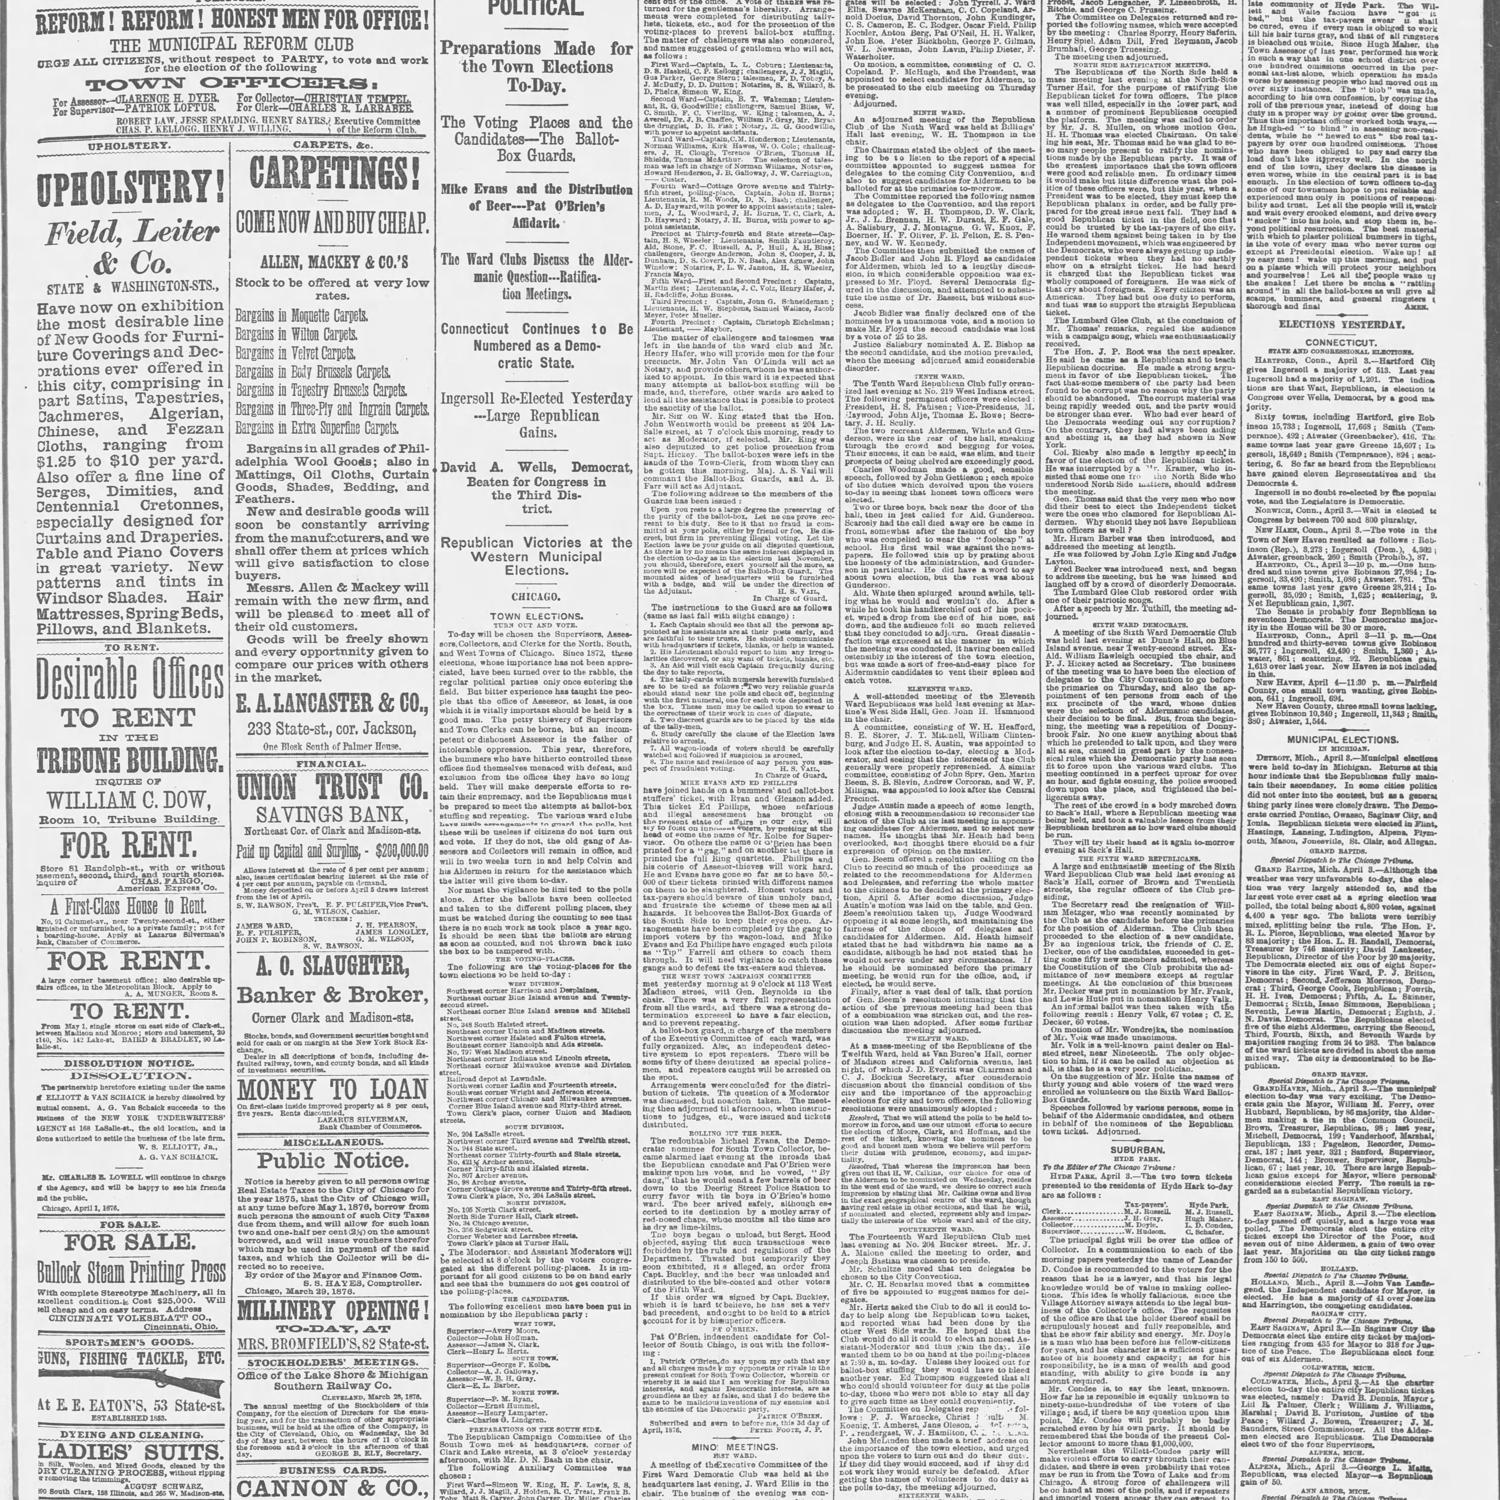 The Chicago Tribune, 1876-04-04, page 1